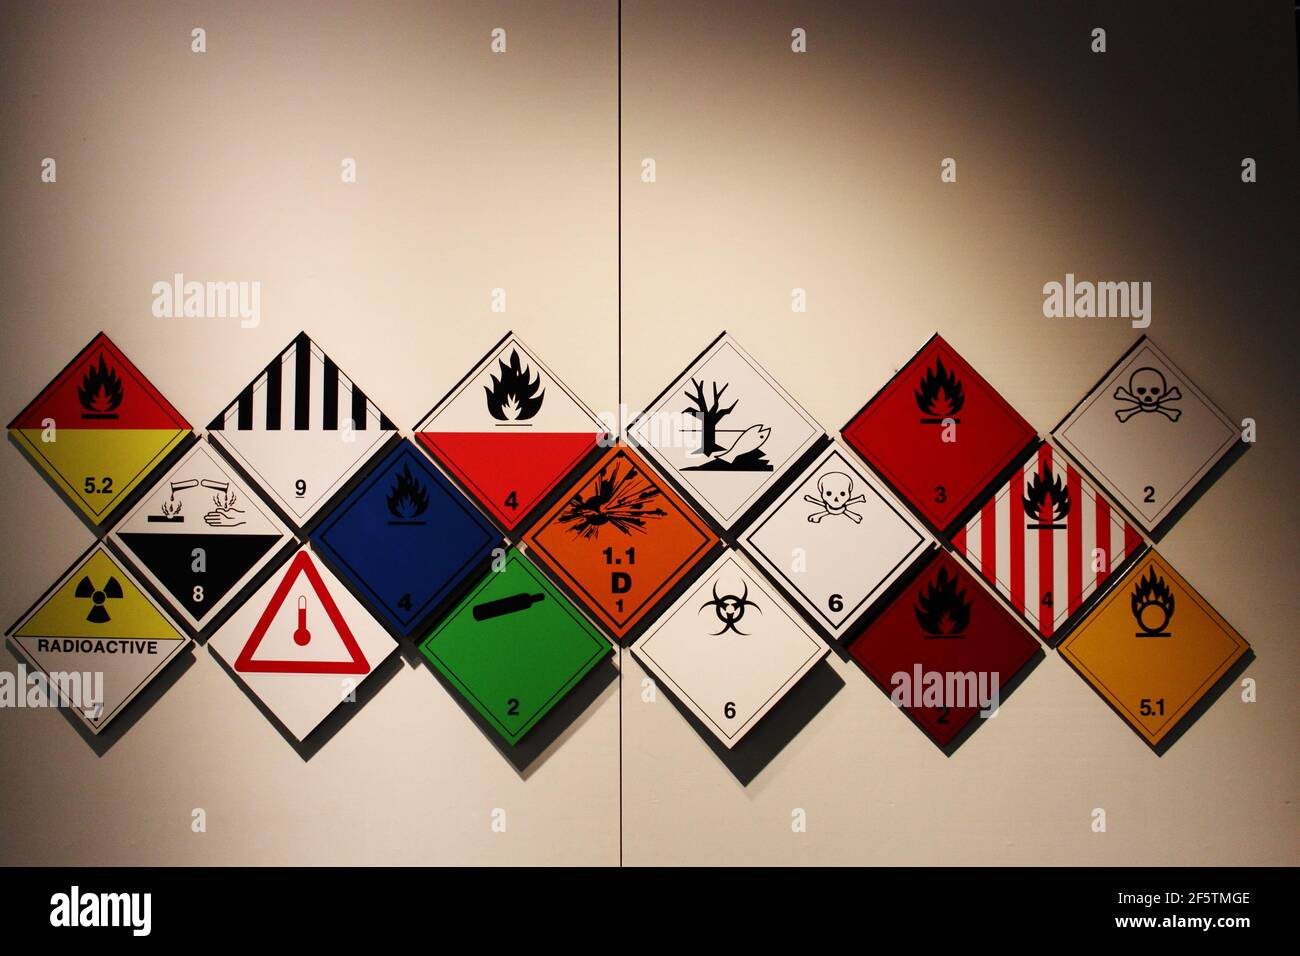 Hazardous symbols. Transportation of dangerous goods symbols and signs and logos. A collection of signs for transporting dangerous goods. Stock Photo